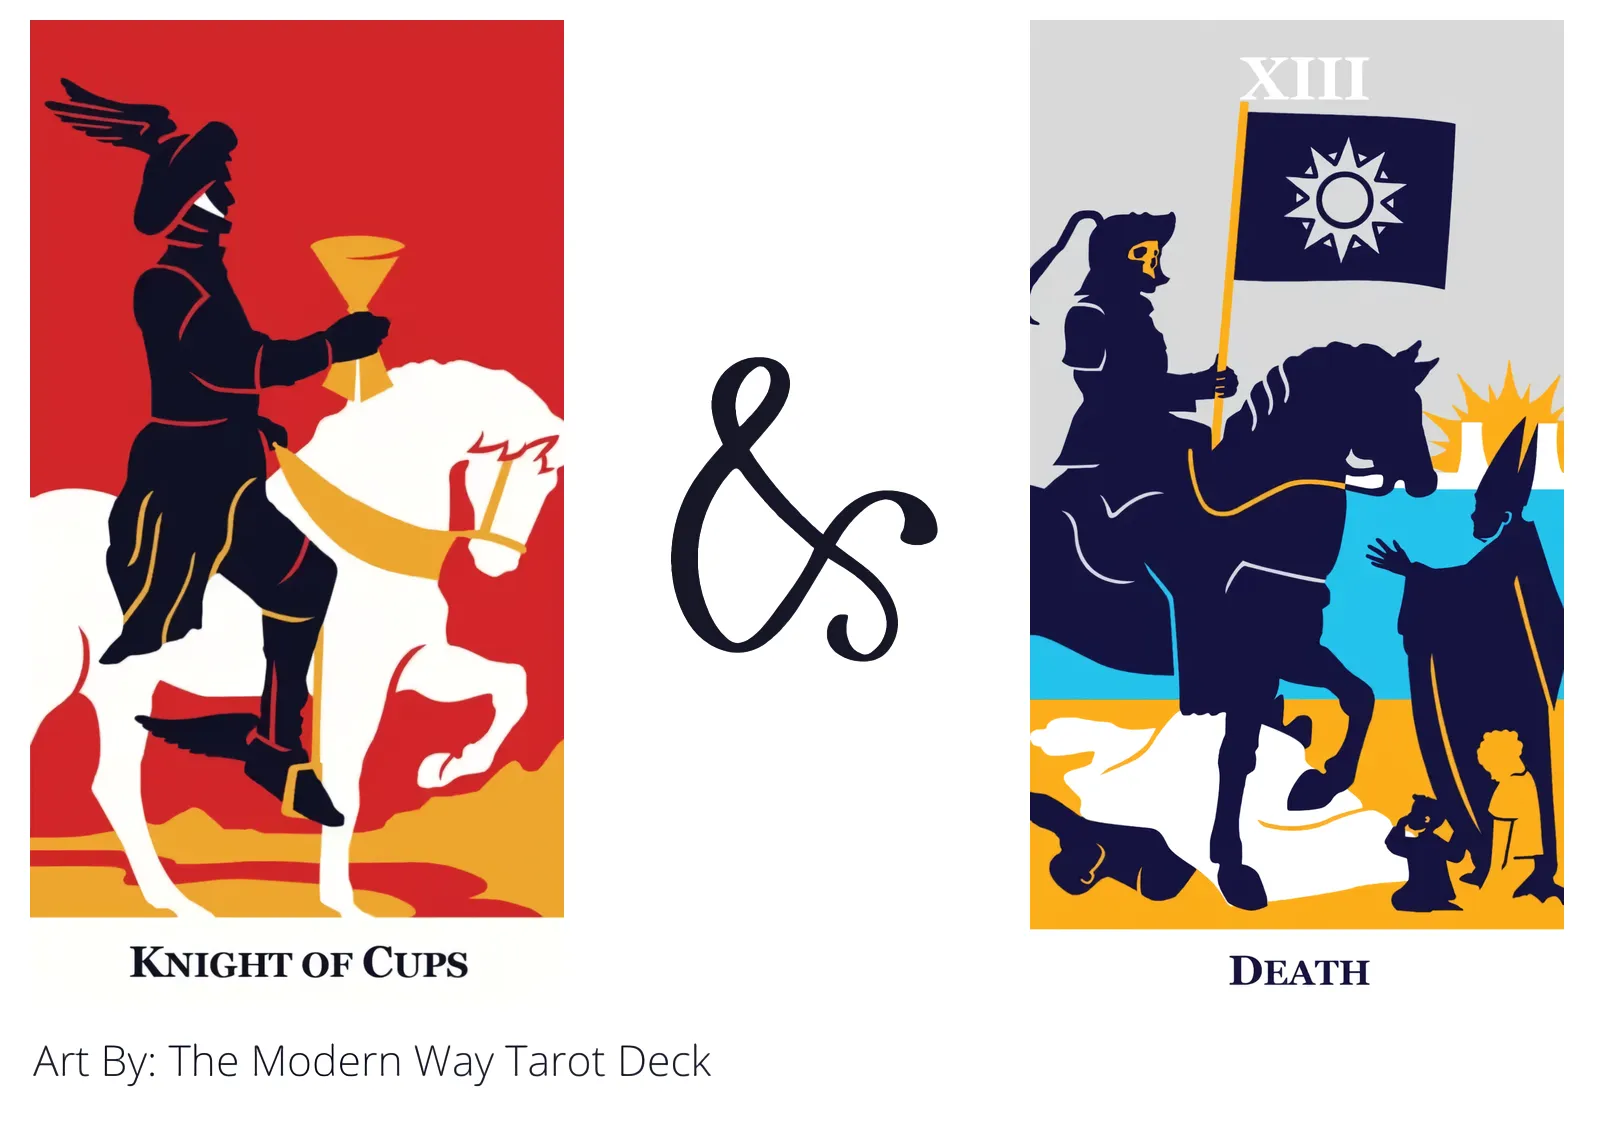 knight of cups and death tarot cards together